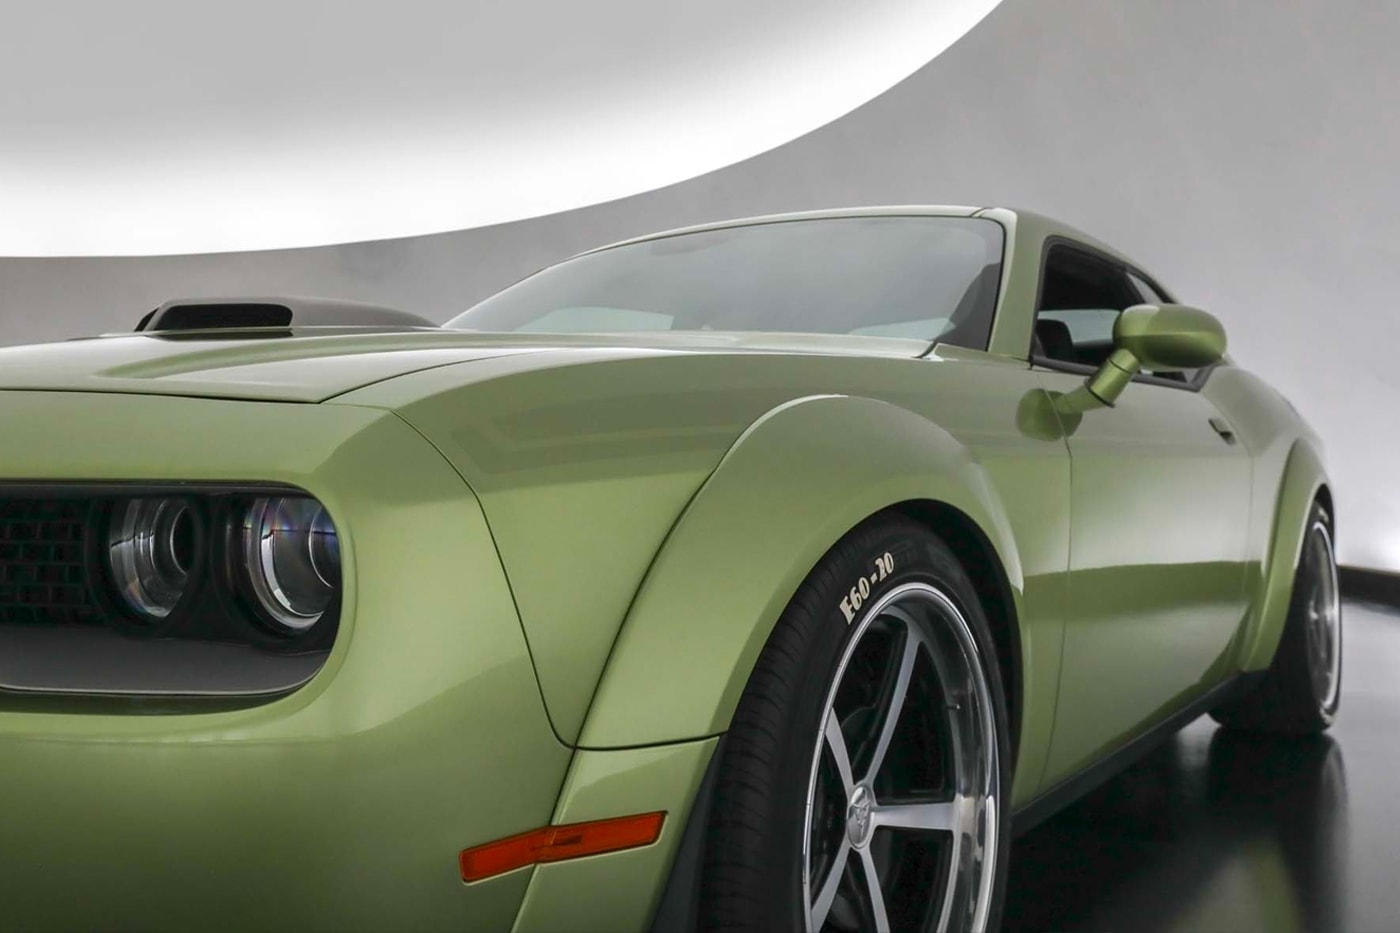 Meet the Dodge Challenger Holy Guacamole Concept  customization of the Challenger R/T Scat Pack Widebody 50th Anniversary edition rotten avocado gold school shaker hood mopar hemi v8 muscle car news